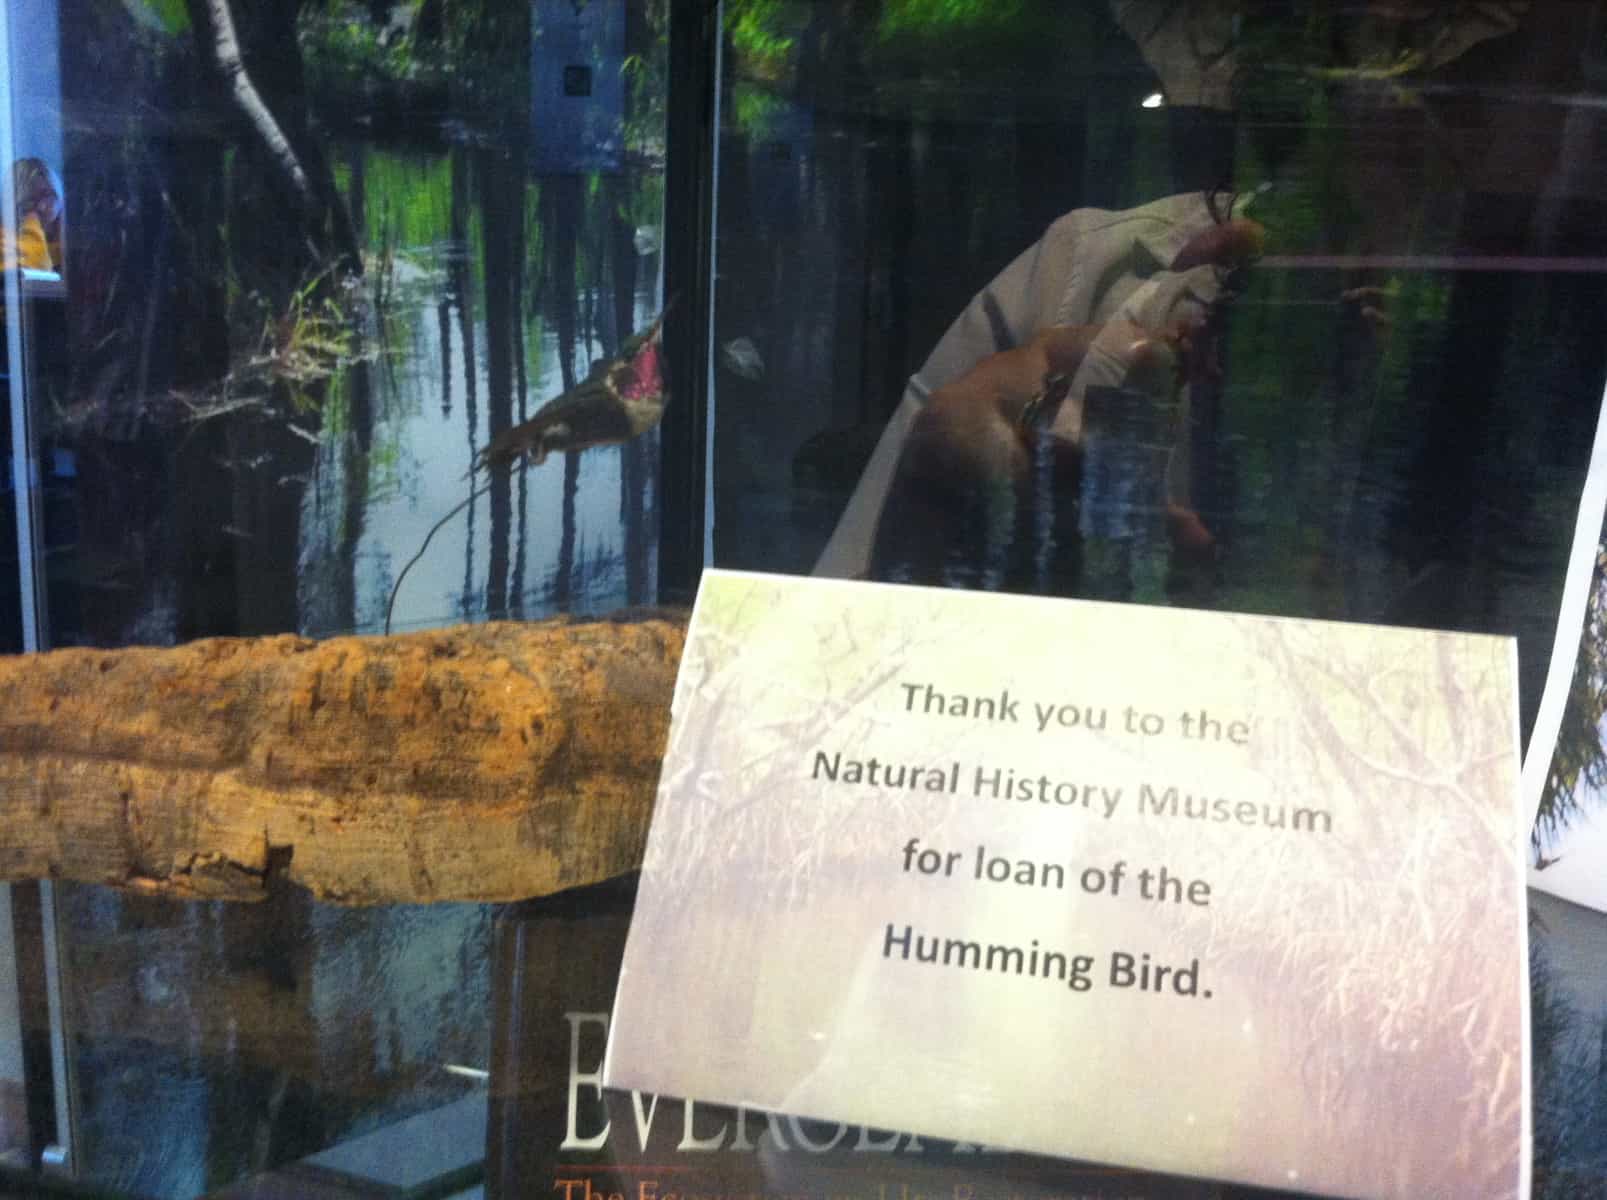 Hummingbird from the UI Museum of Natural History